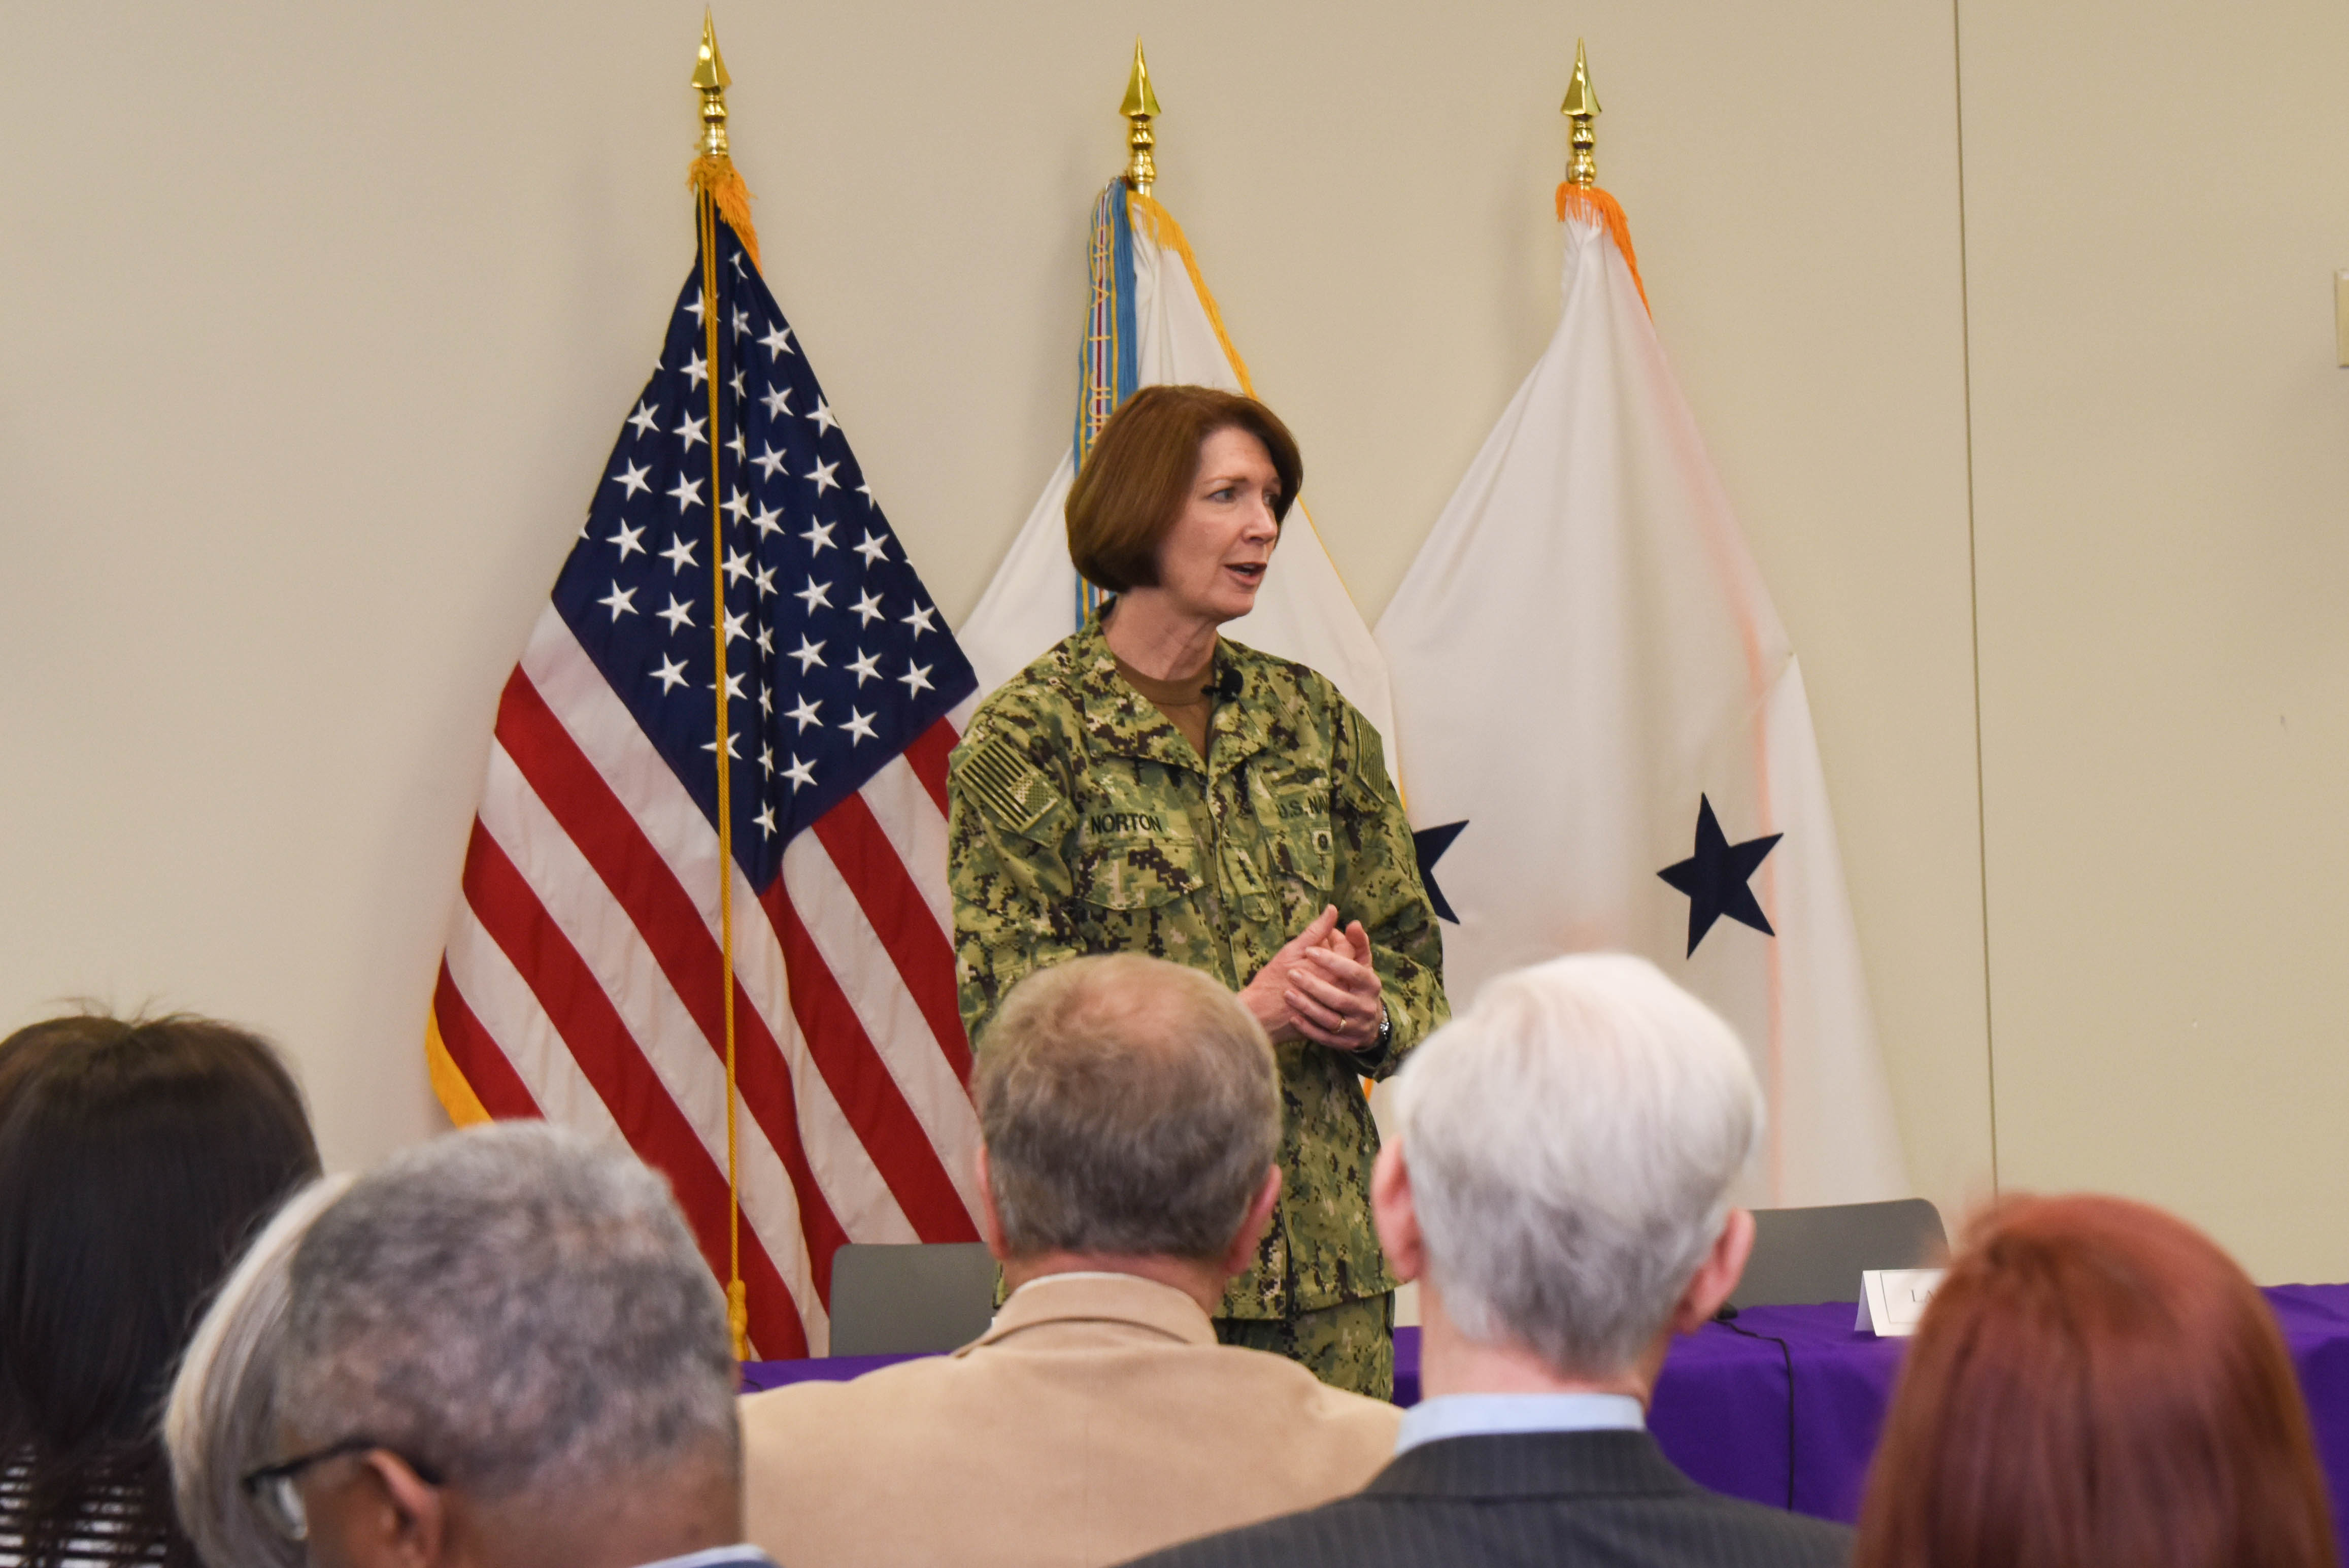 Vice Admiral Nancy Norton gives keynote speech for Women-Owned Small Business Event